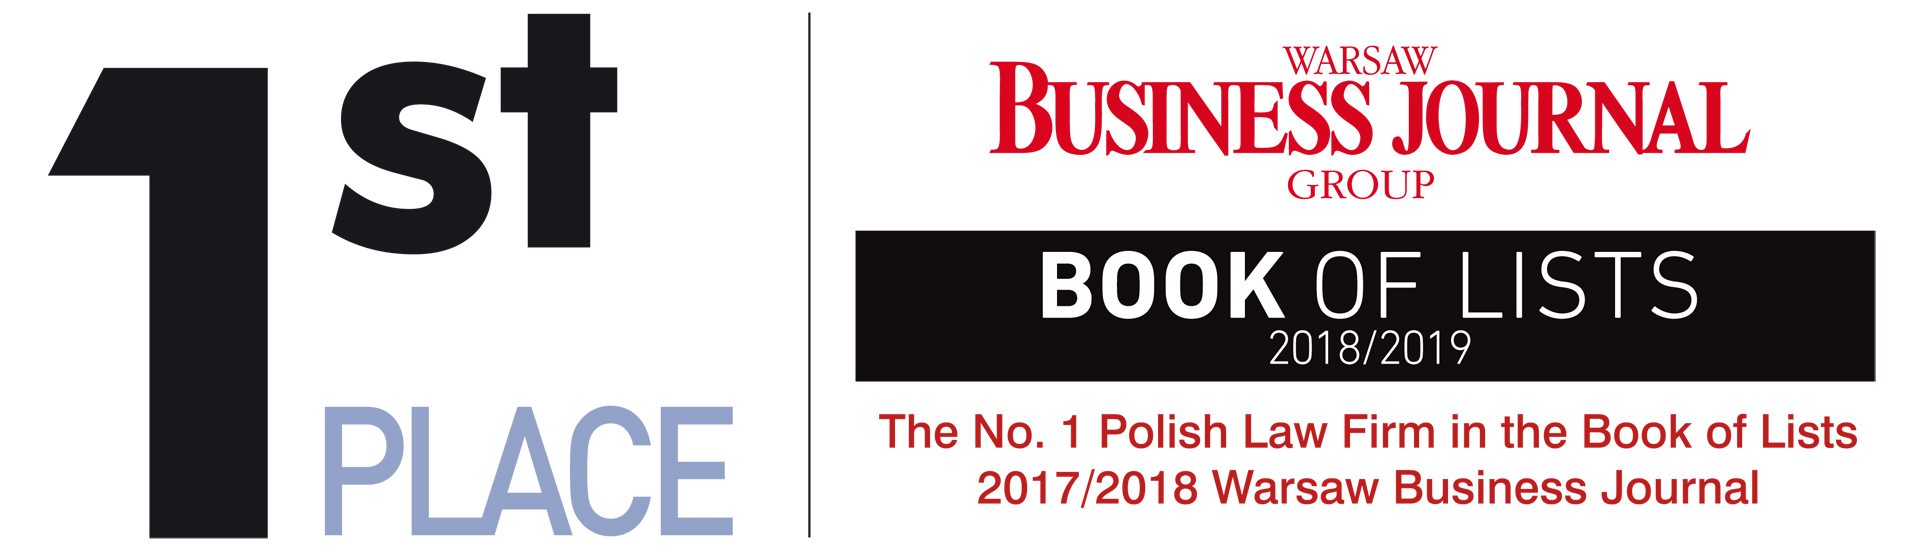 Warsaw Business Journal Book of Lists 2018/19